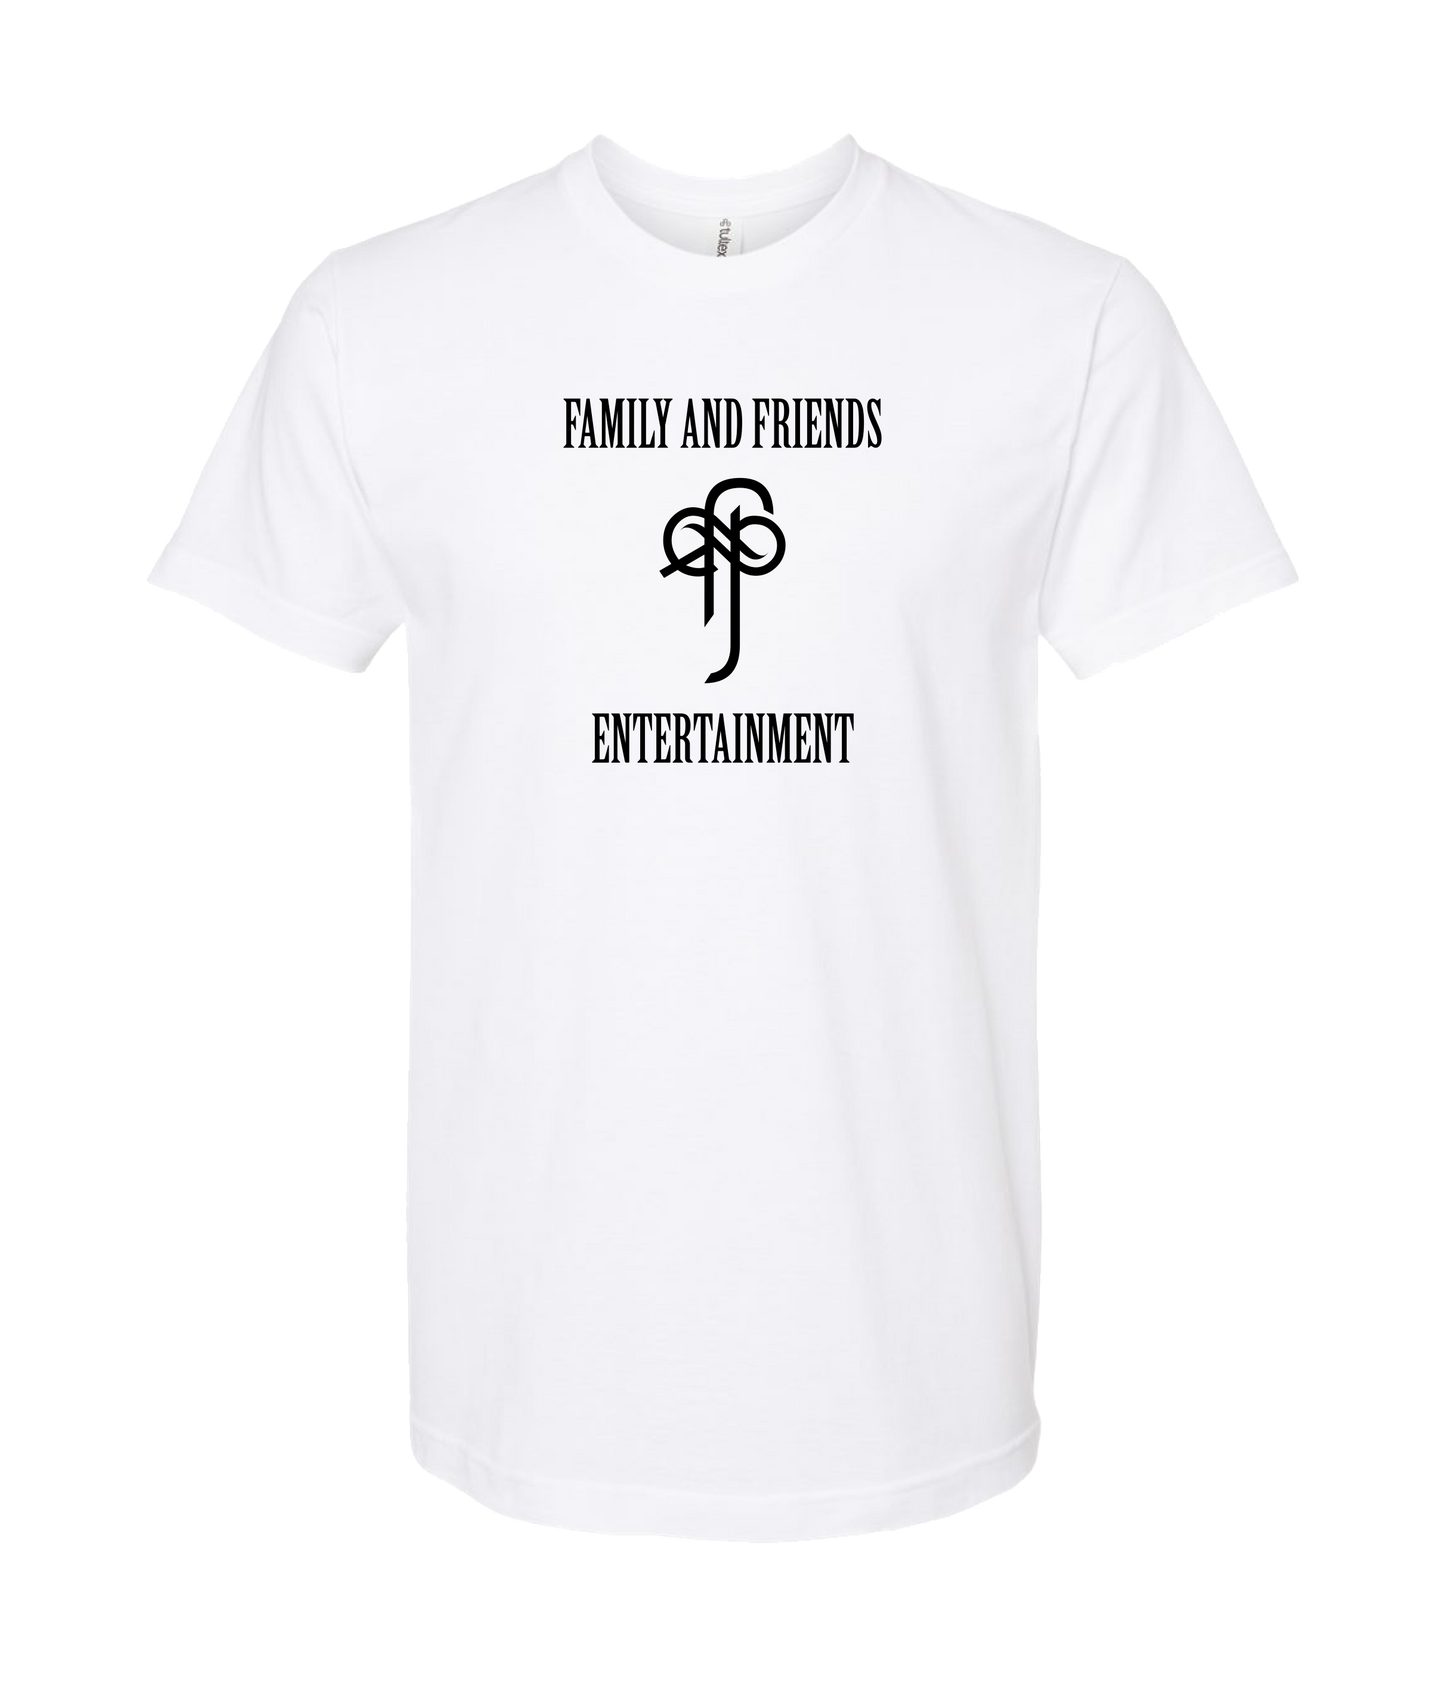 Sincrawford - Family and Friends Ent.  - White T Shirt